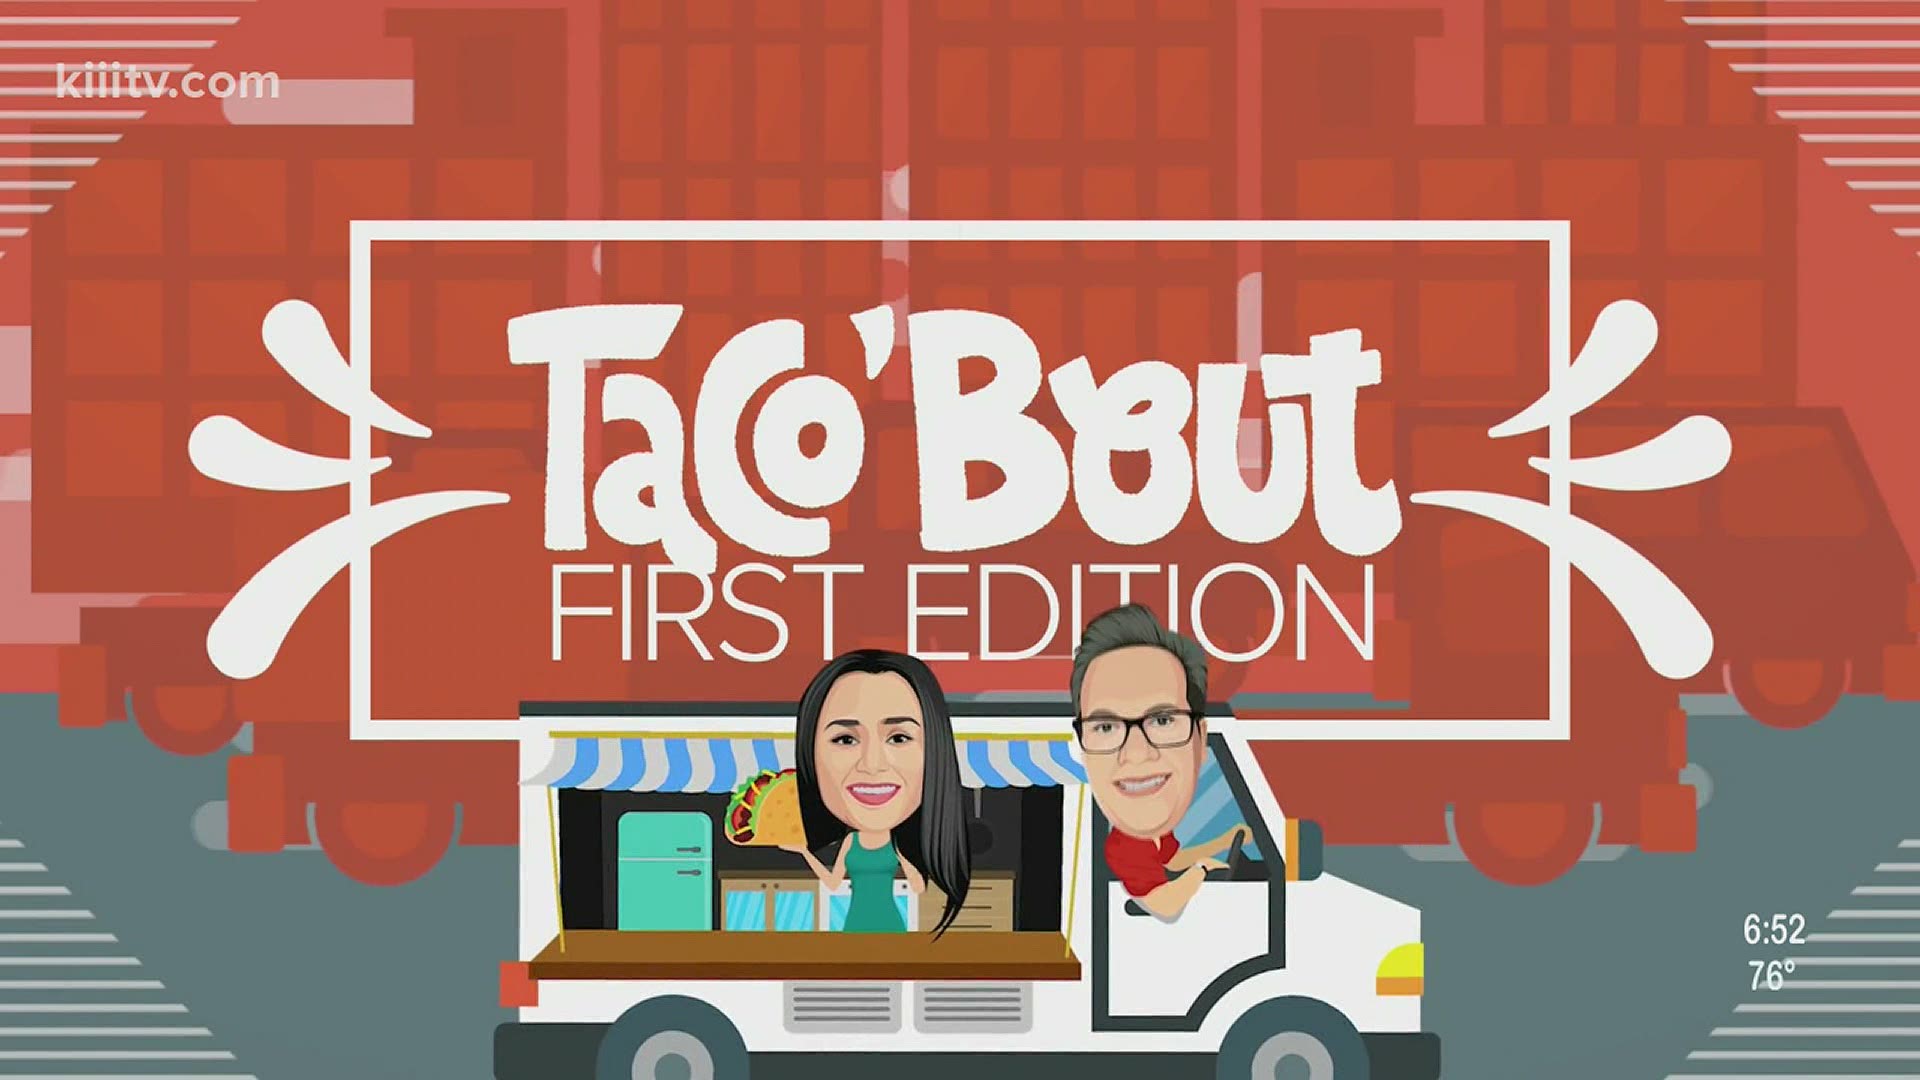 Who doesn't love a tasty breakfast taco? 3News First Edition is supporting local businesses with 'Taco 'Bout First Edition'